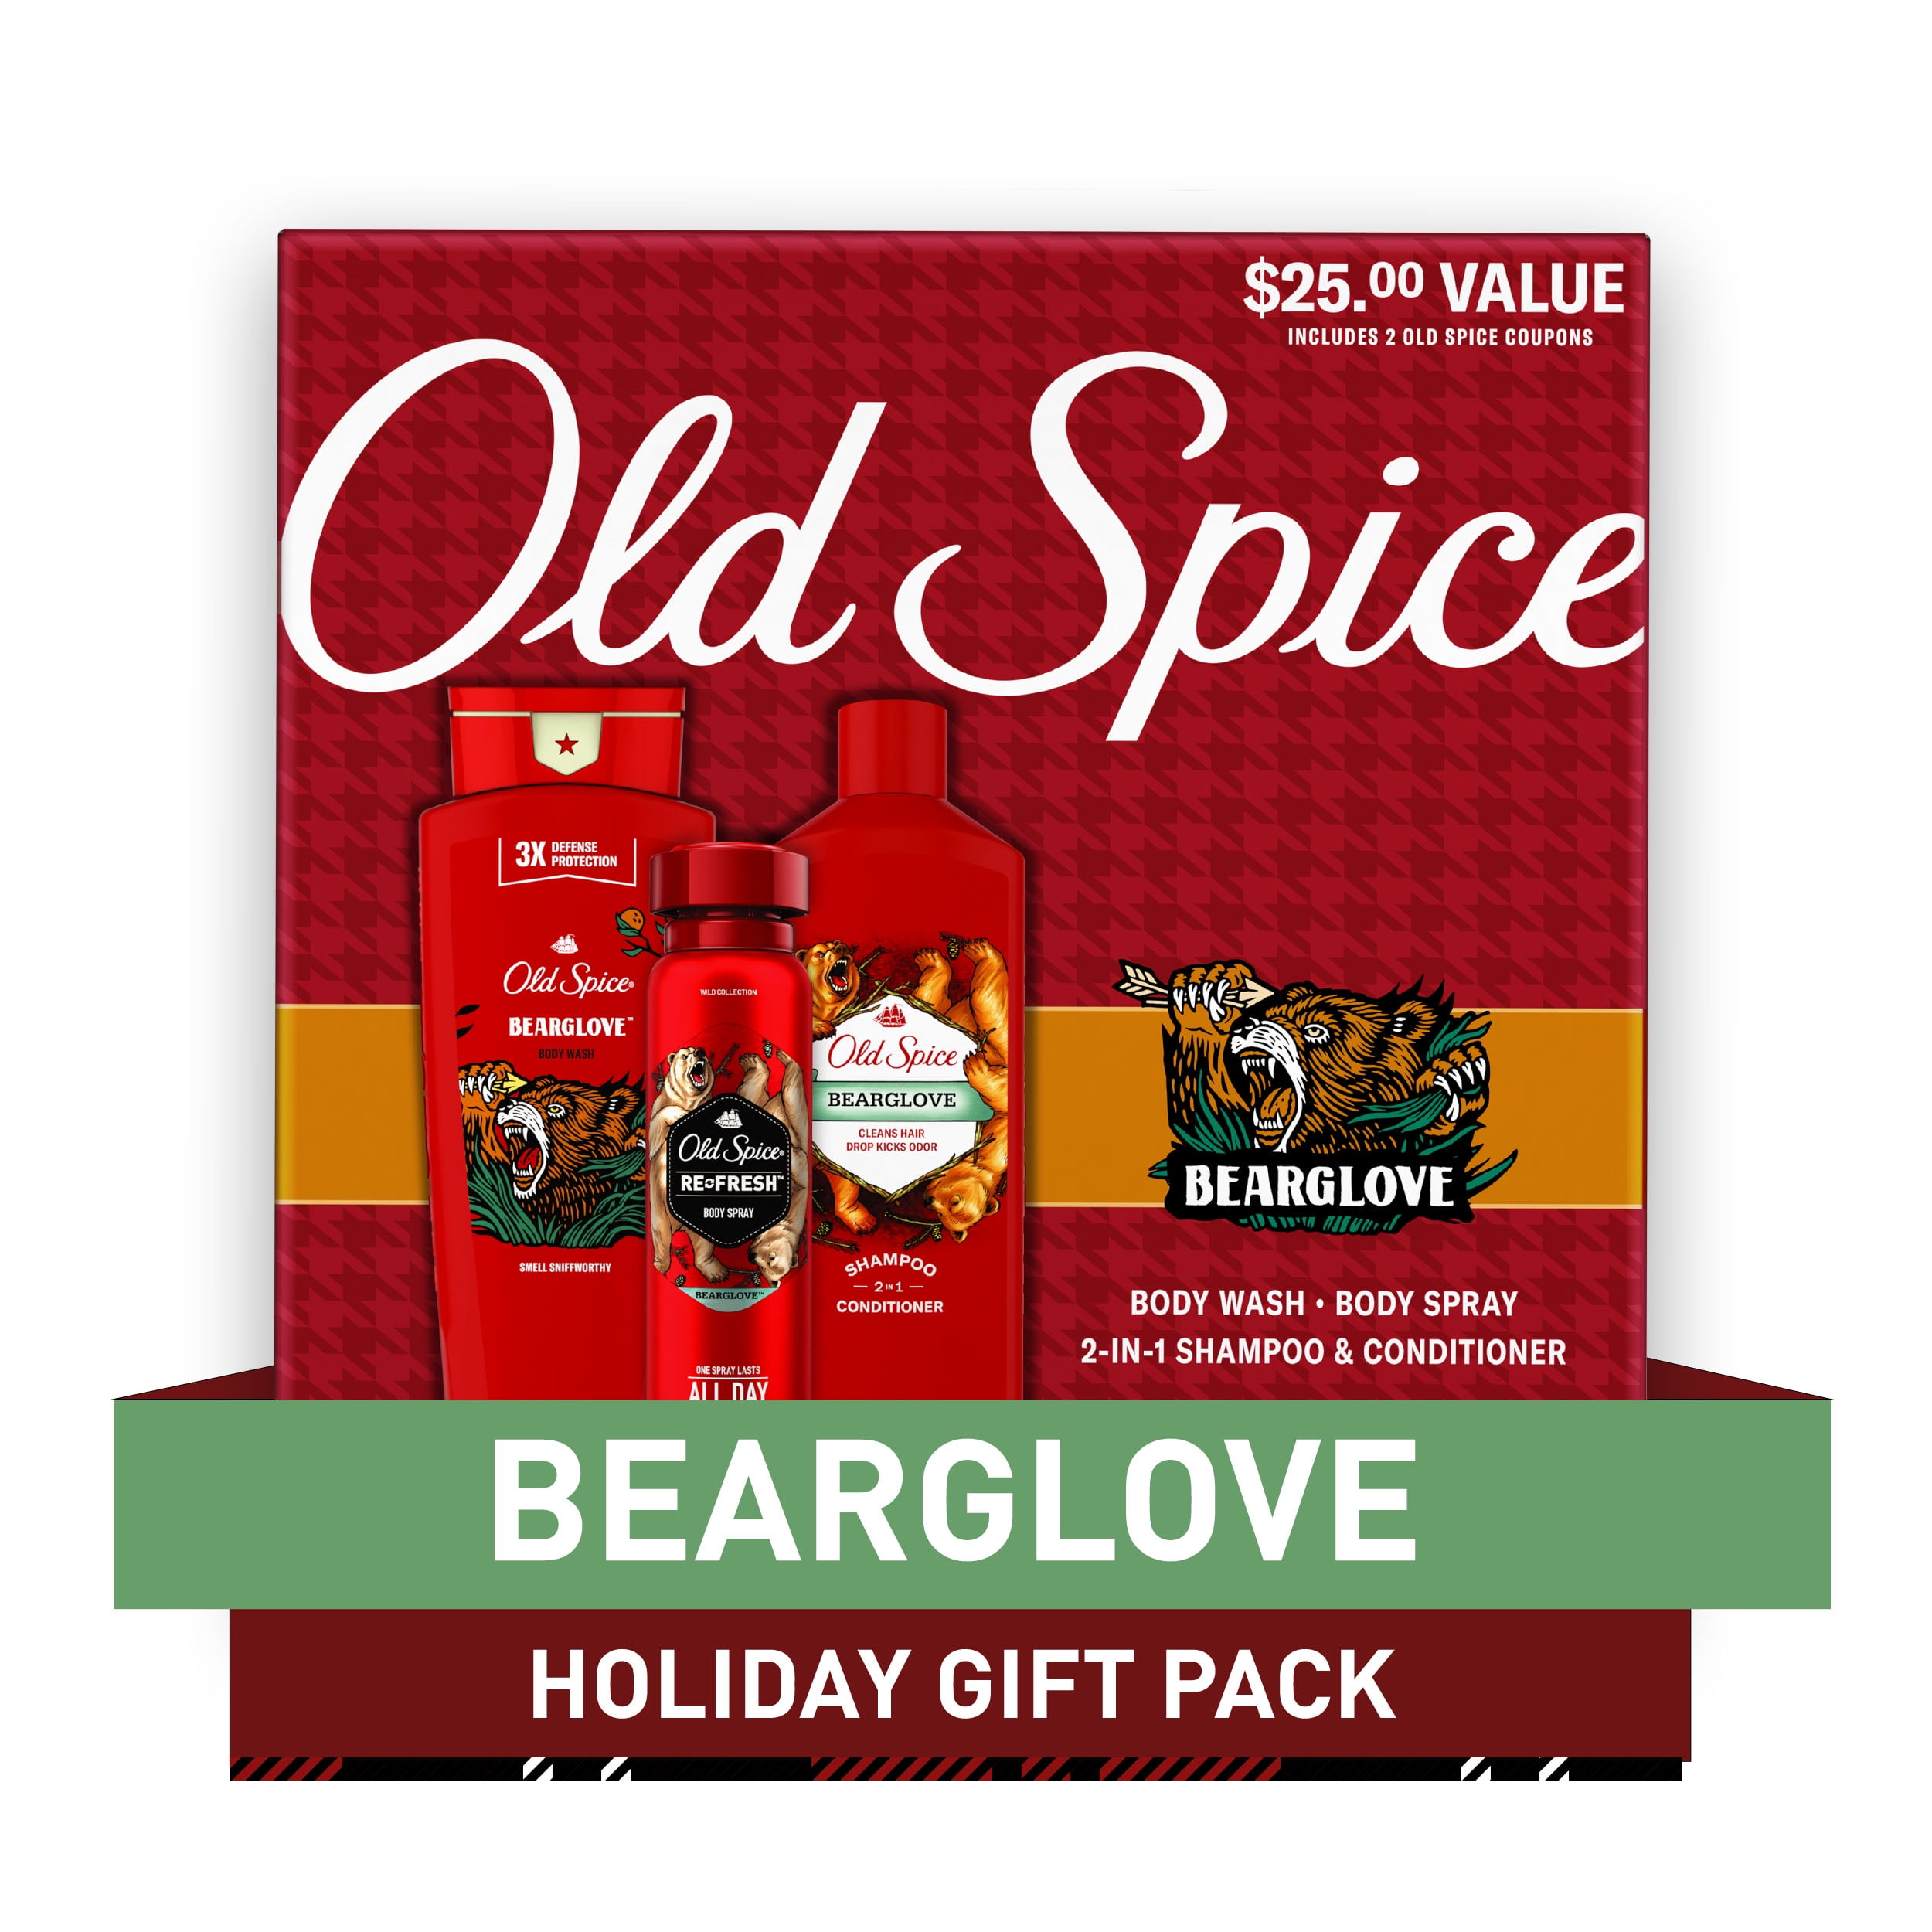 ($25 Value) Old Spice Bearglove Holiday Gift Pack, Includes Body Wash, Body Spray and 2-in-1 Shampoo & Conditioner